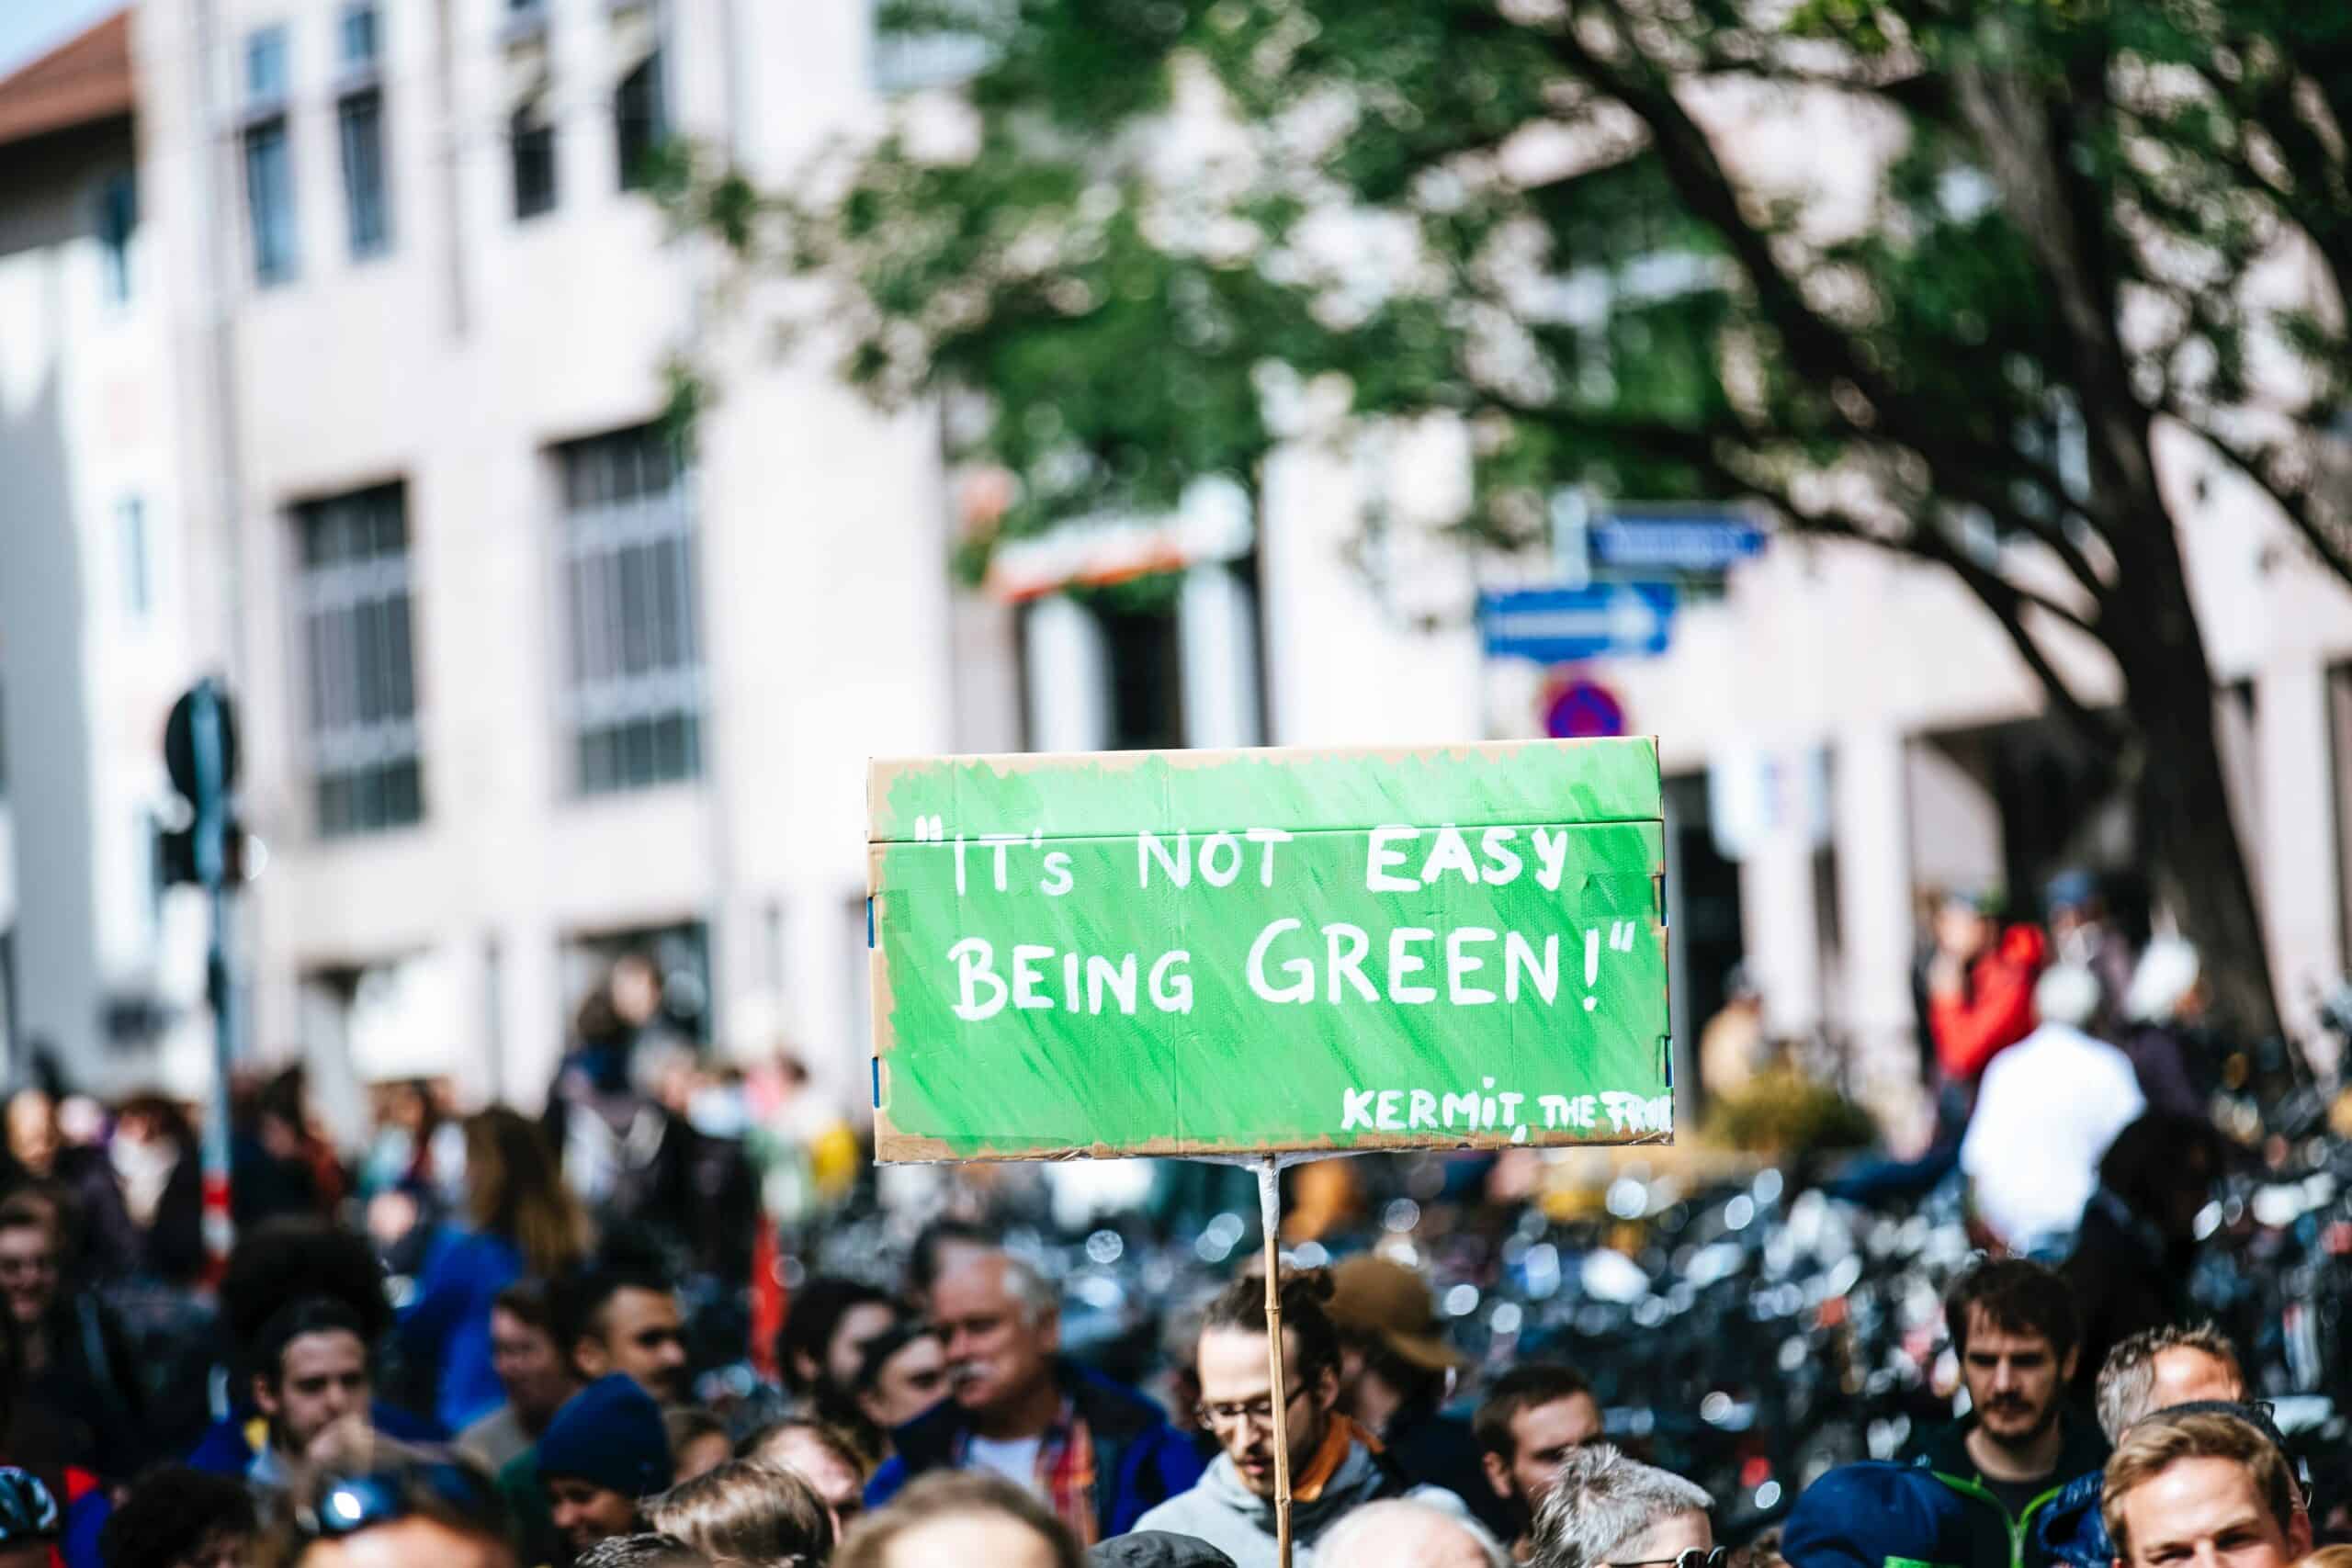 "It's not easy being green" sign